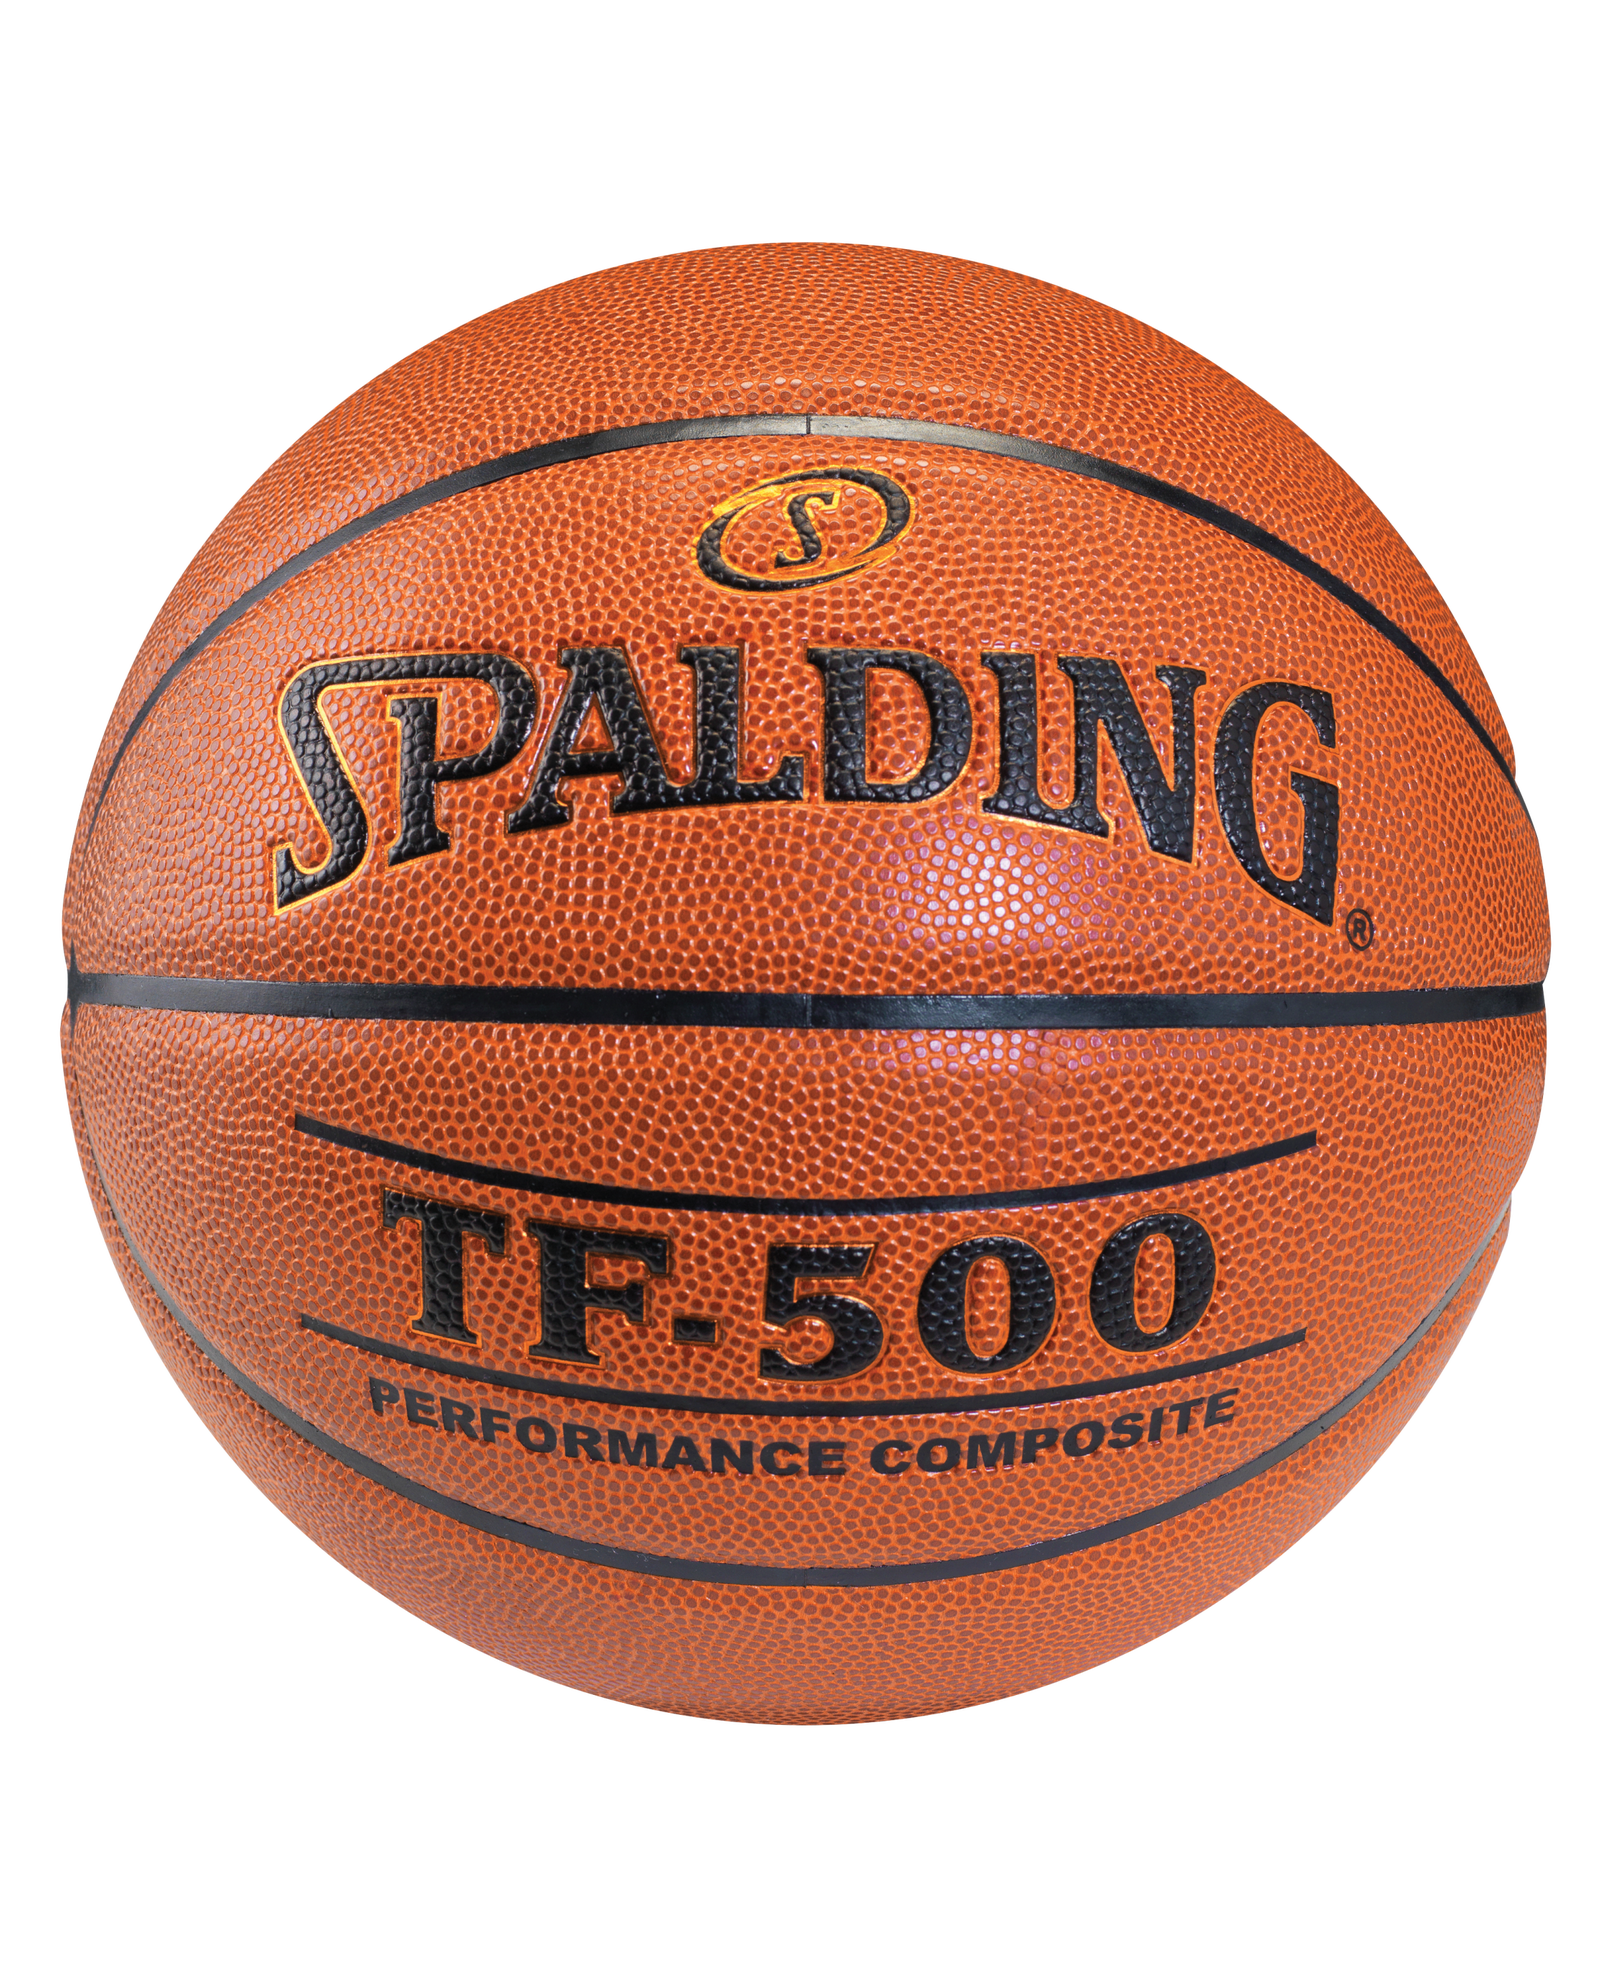 SPALDING TF-500 COMPOSITE LEATHER BASKETBALL 28.5 INTERMEDIATE SIZE 